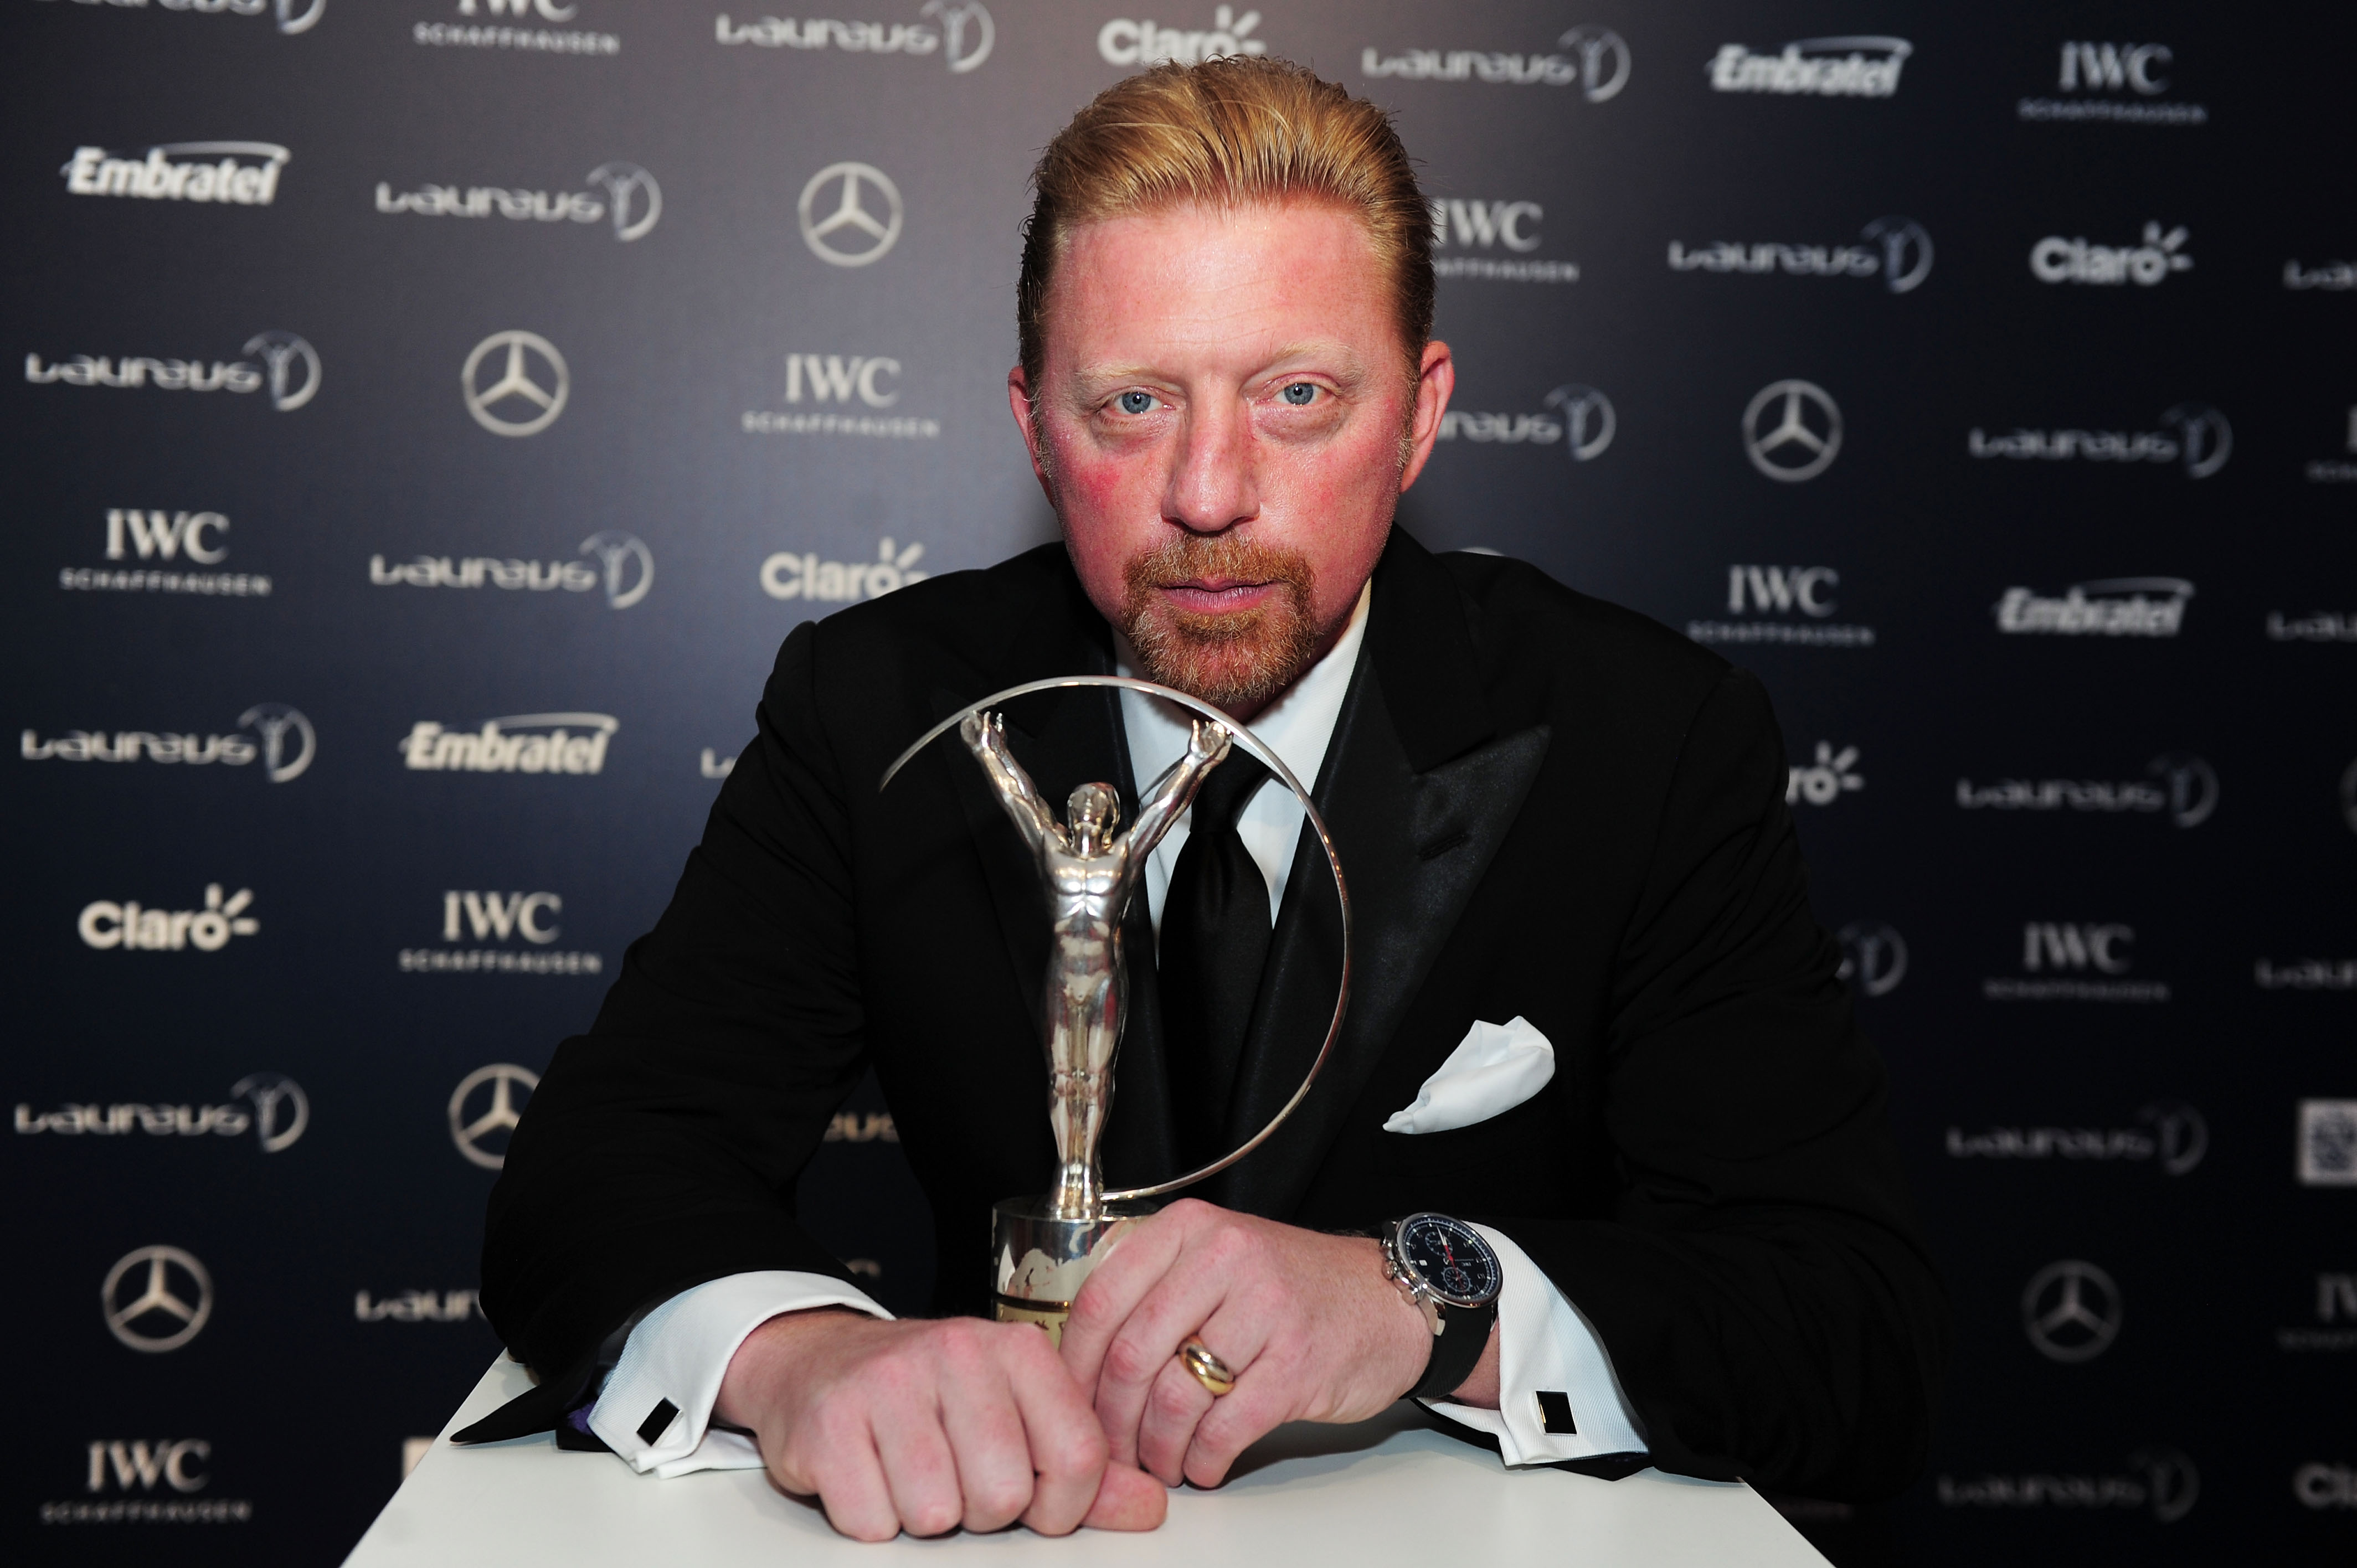 Boris Becker poses with the trophy at the 2013 Laureus World Sports Awards